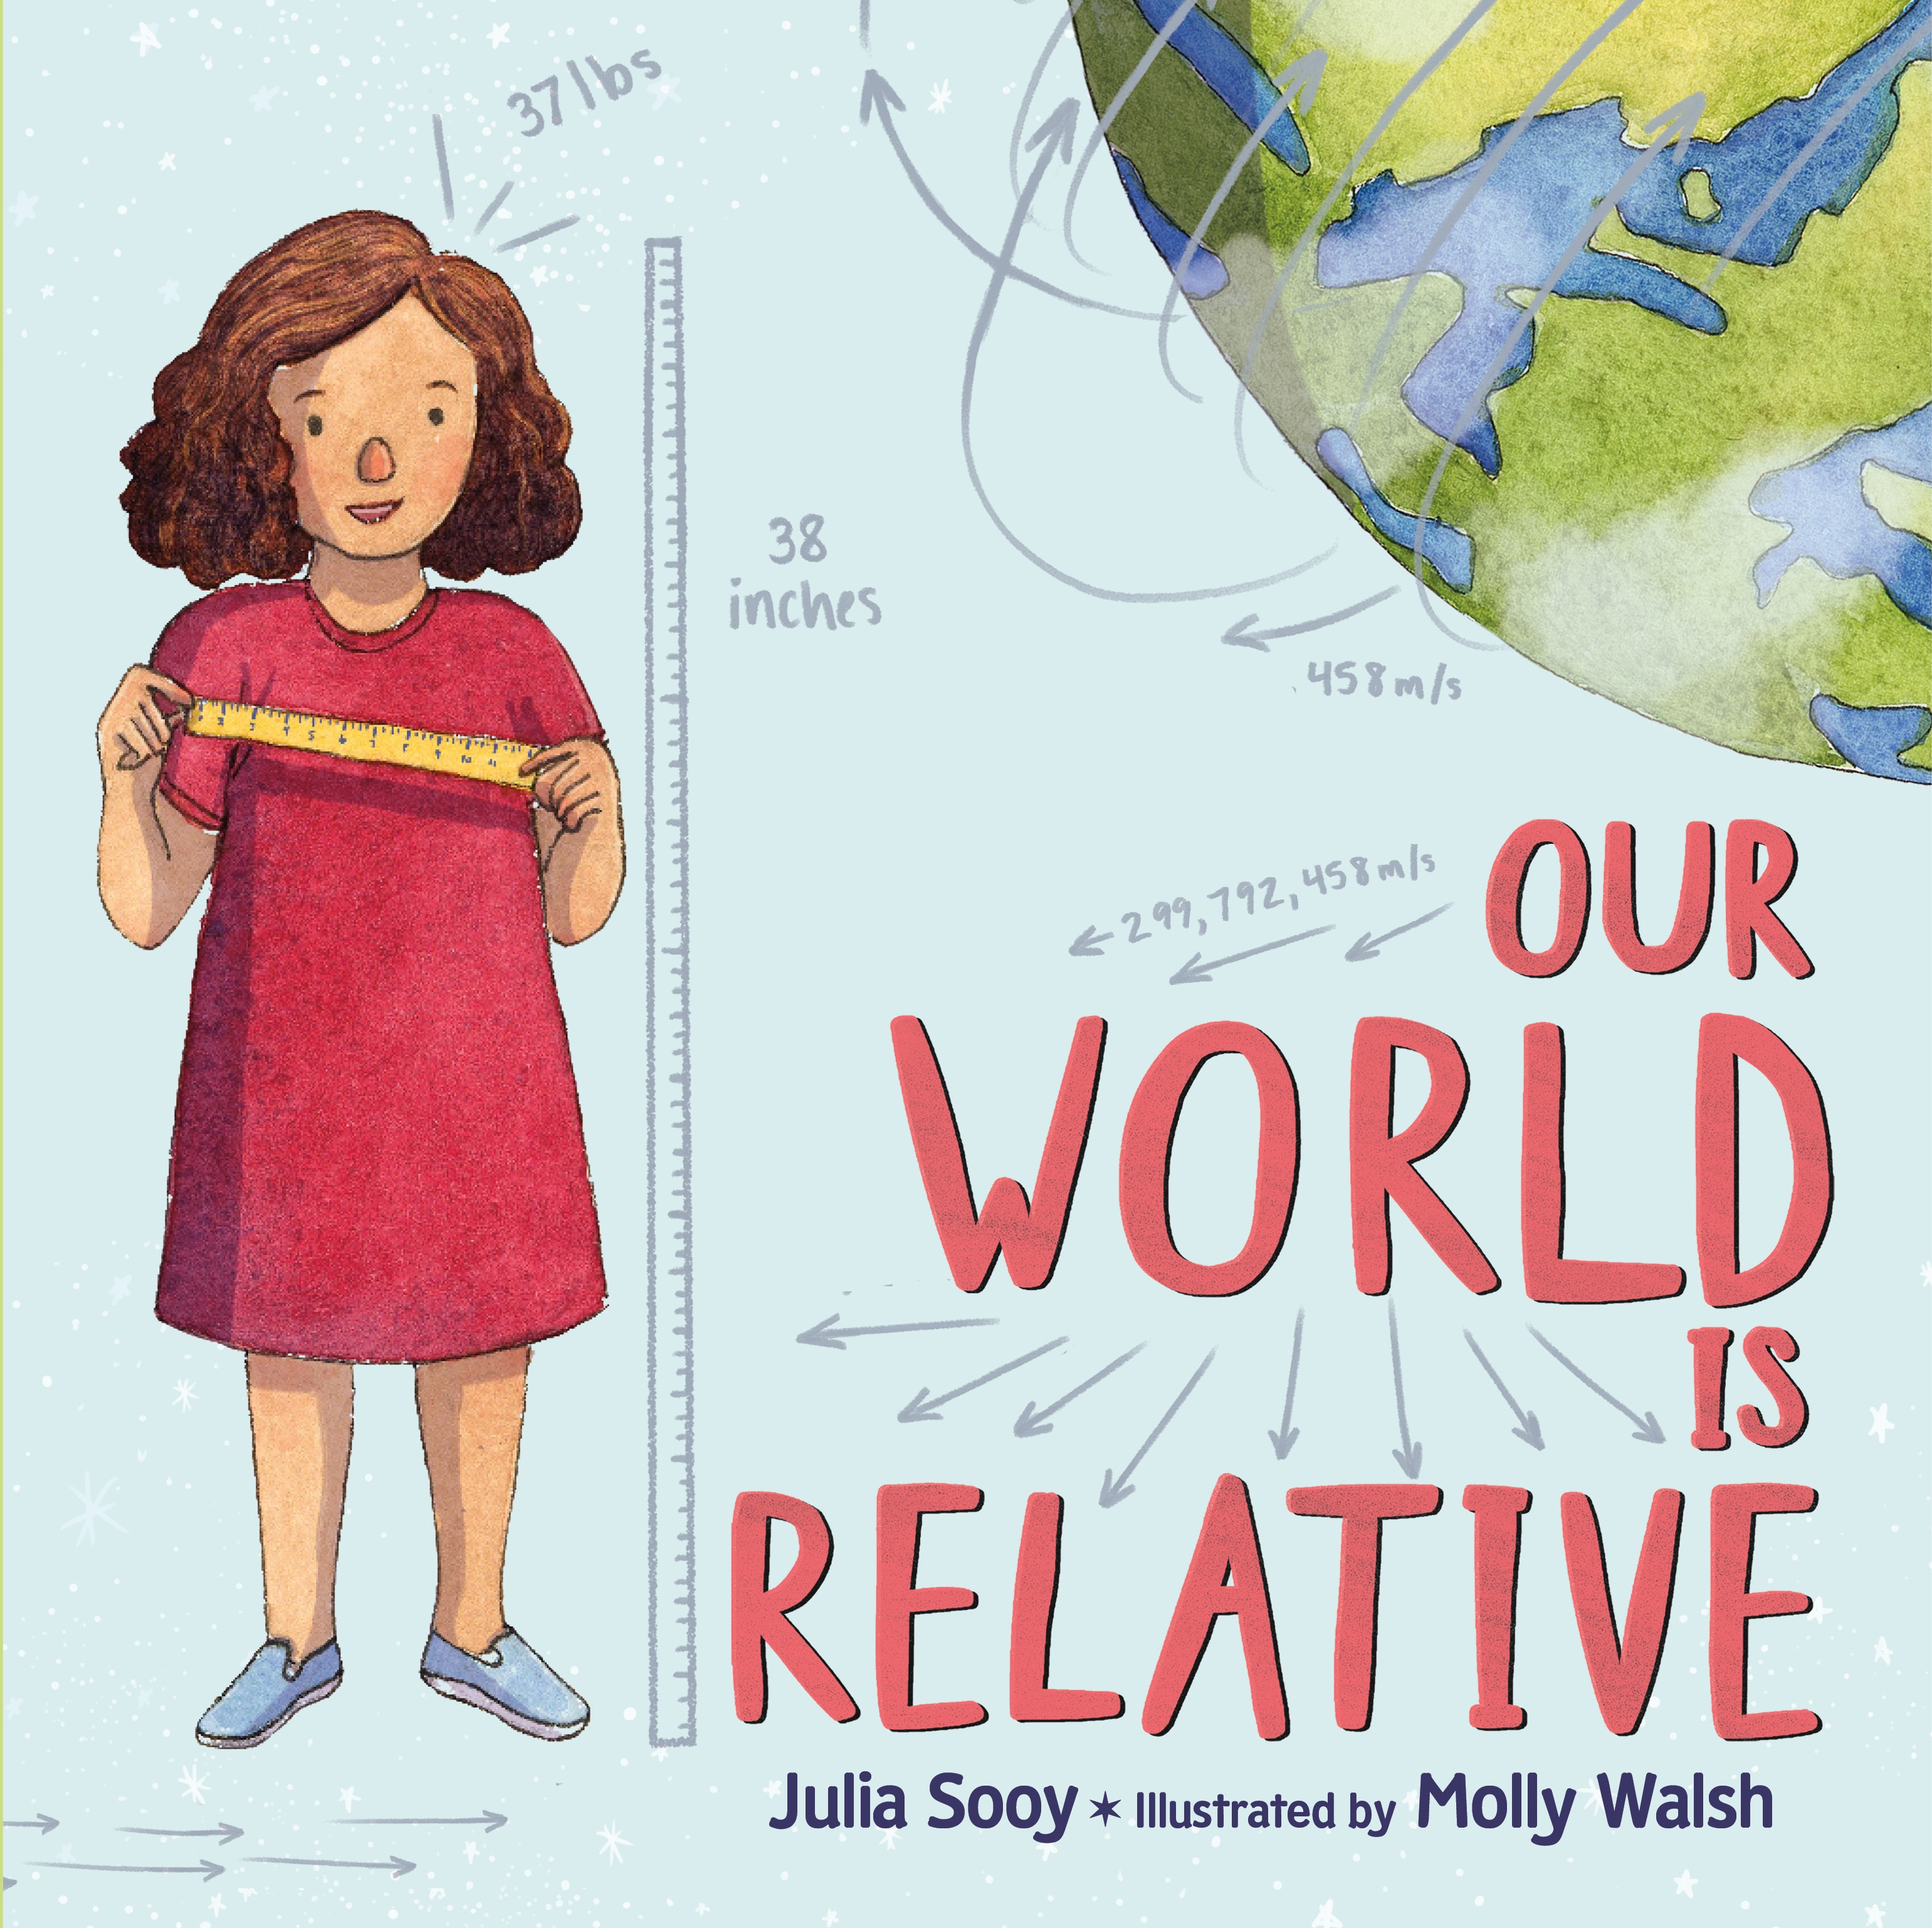 Sunday Story Time: Our World Is Relative by Julia Sooy